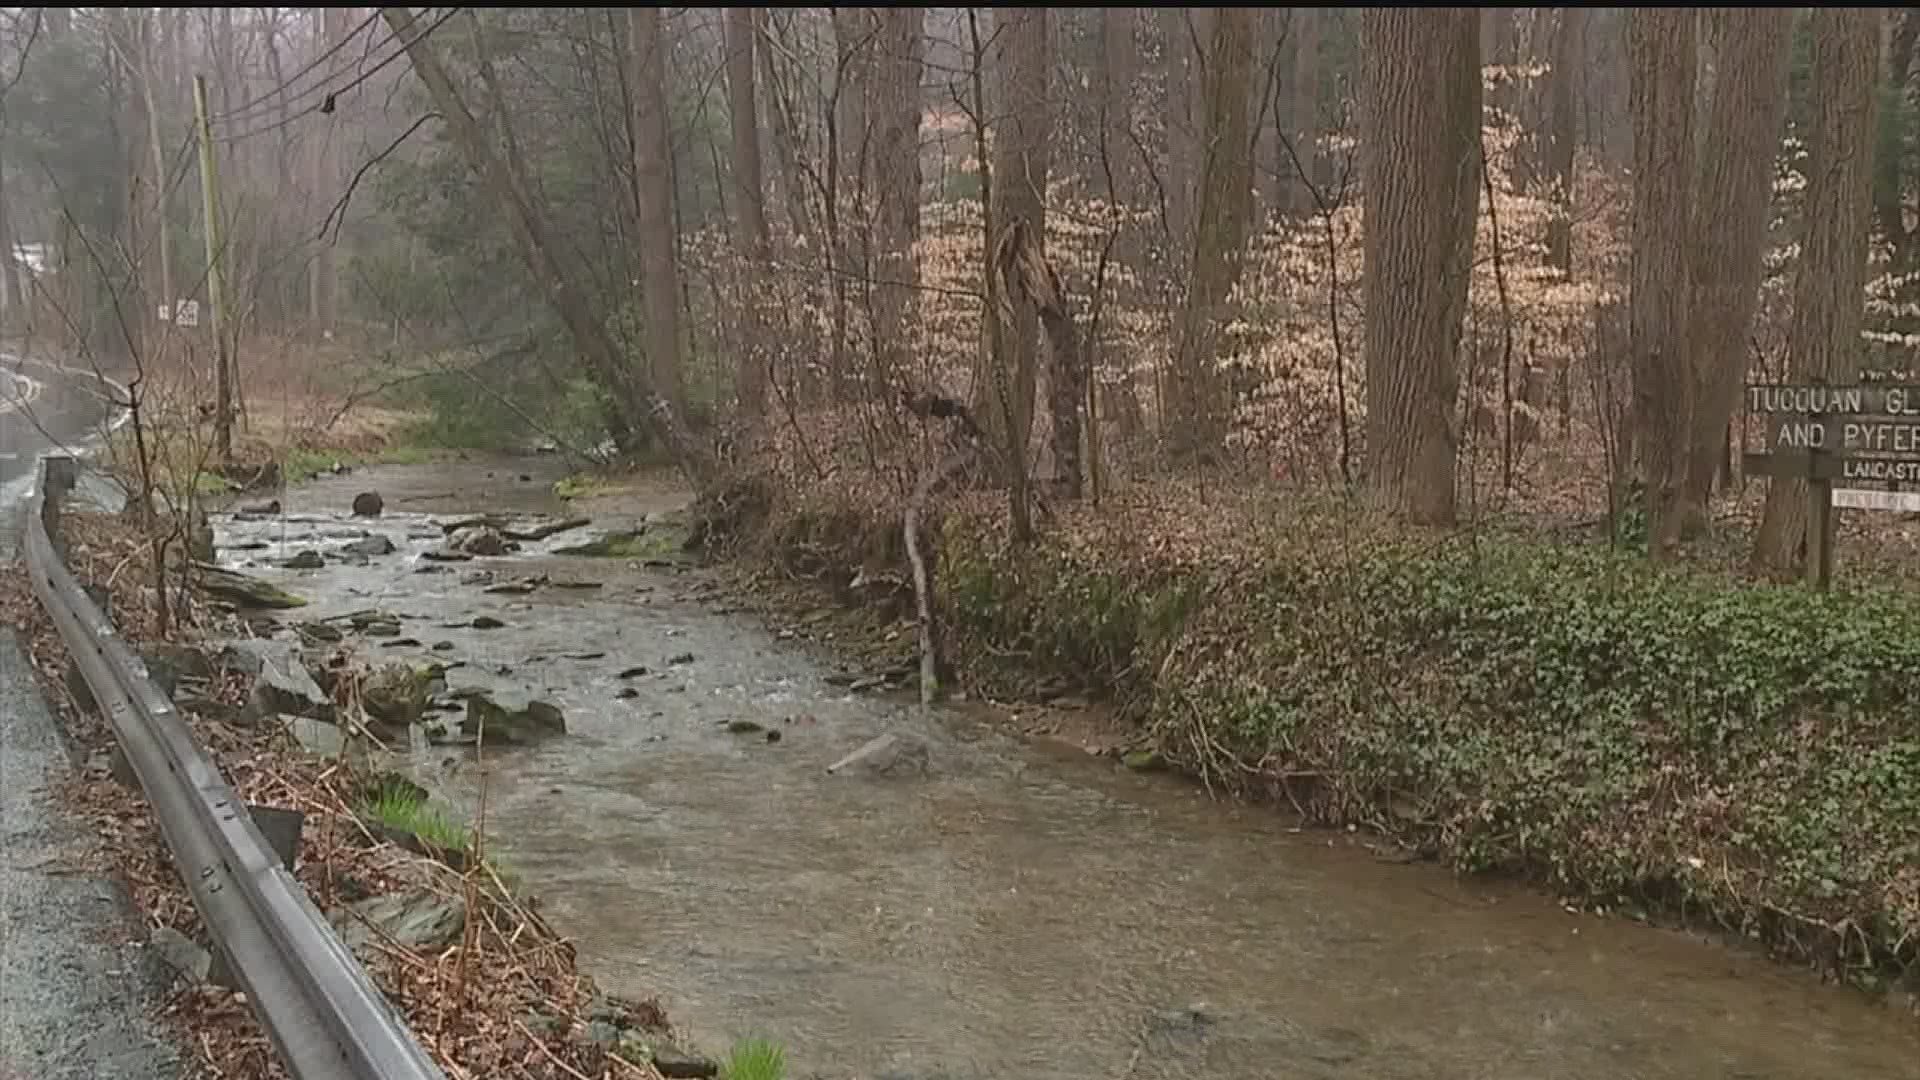 Tucquan Glen Nature Preserve in Holtwood, Lancaster County is closed until further notice after its small parking area along River Road was overrun